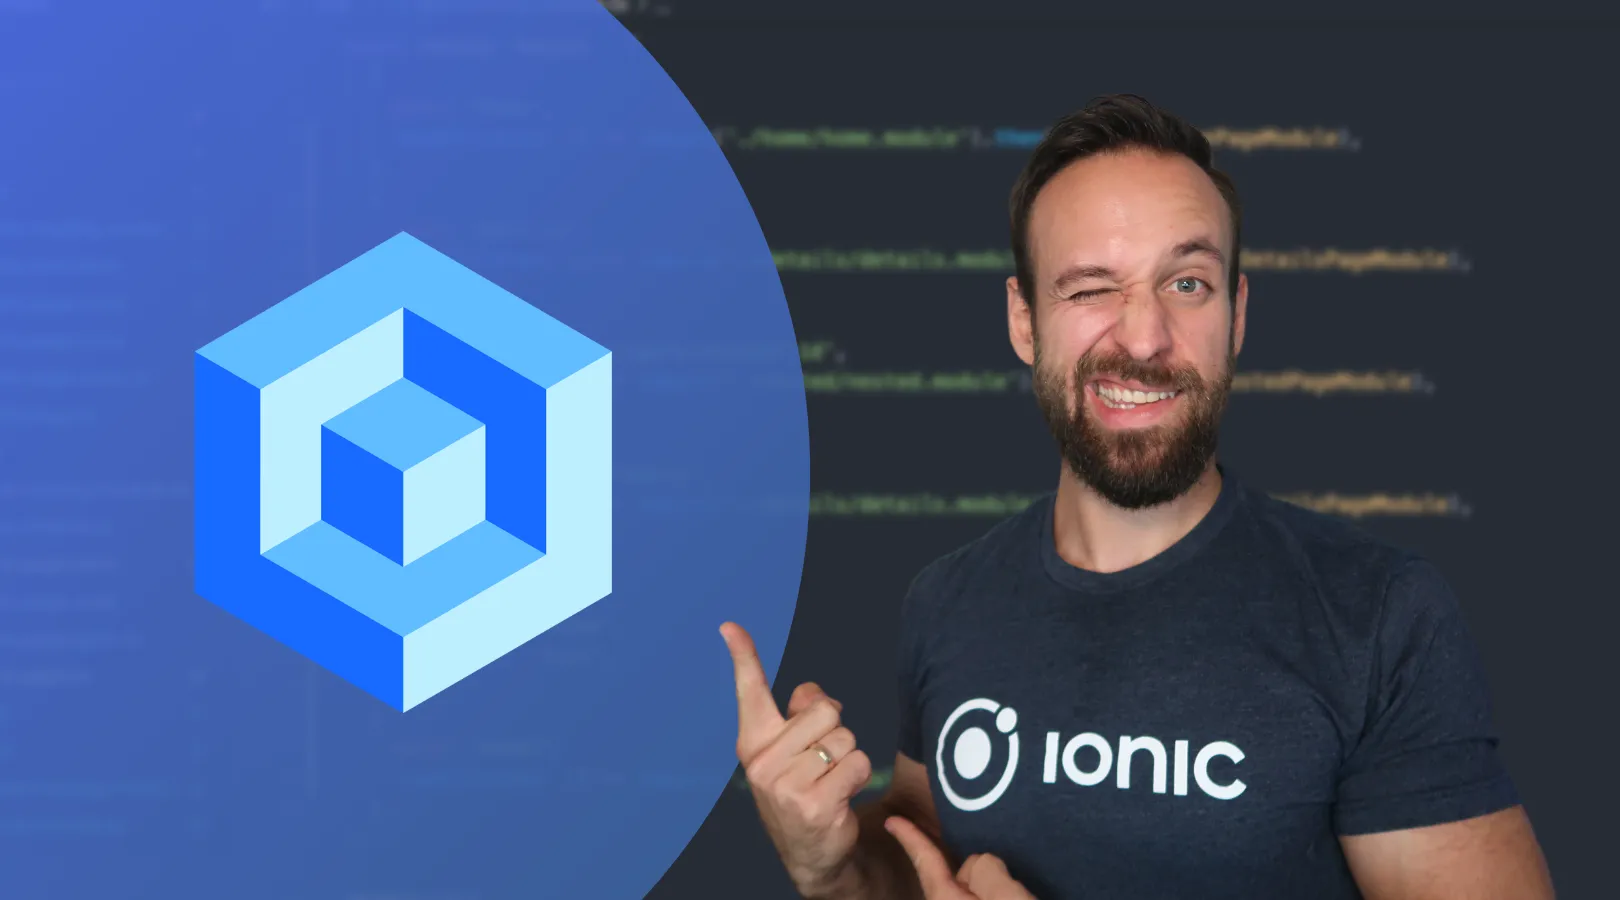 Building Ionic Image Upload With PHP Server